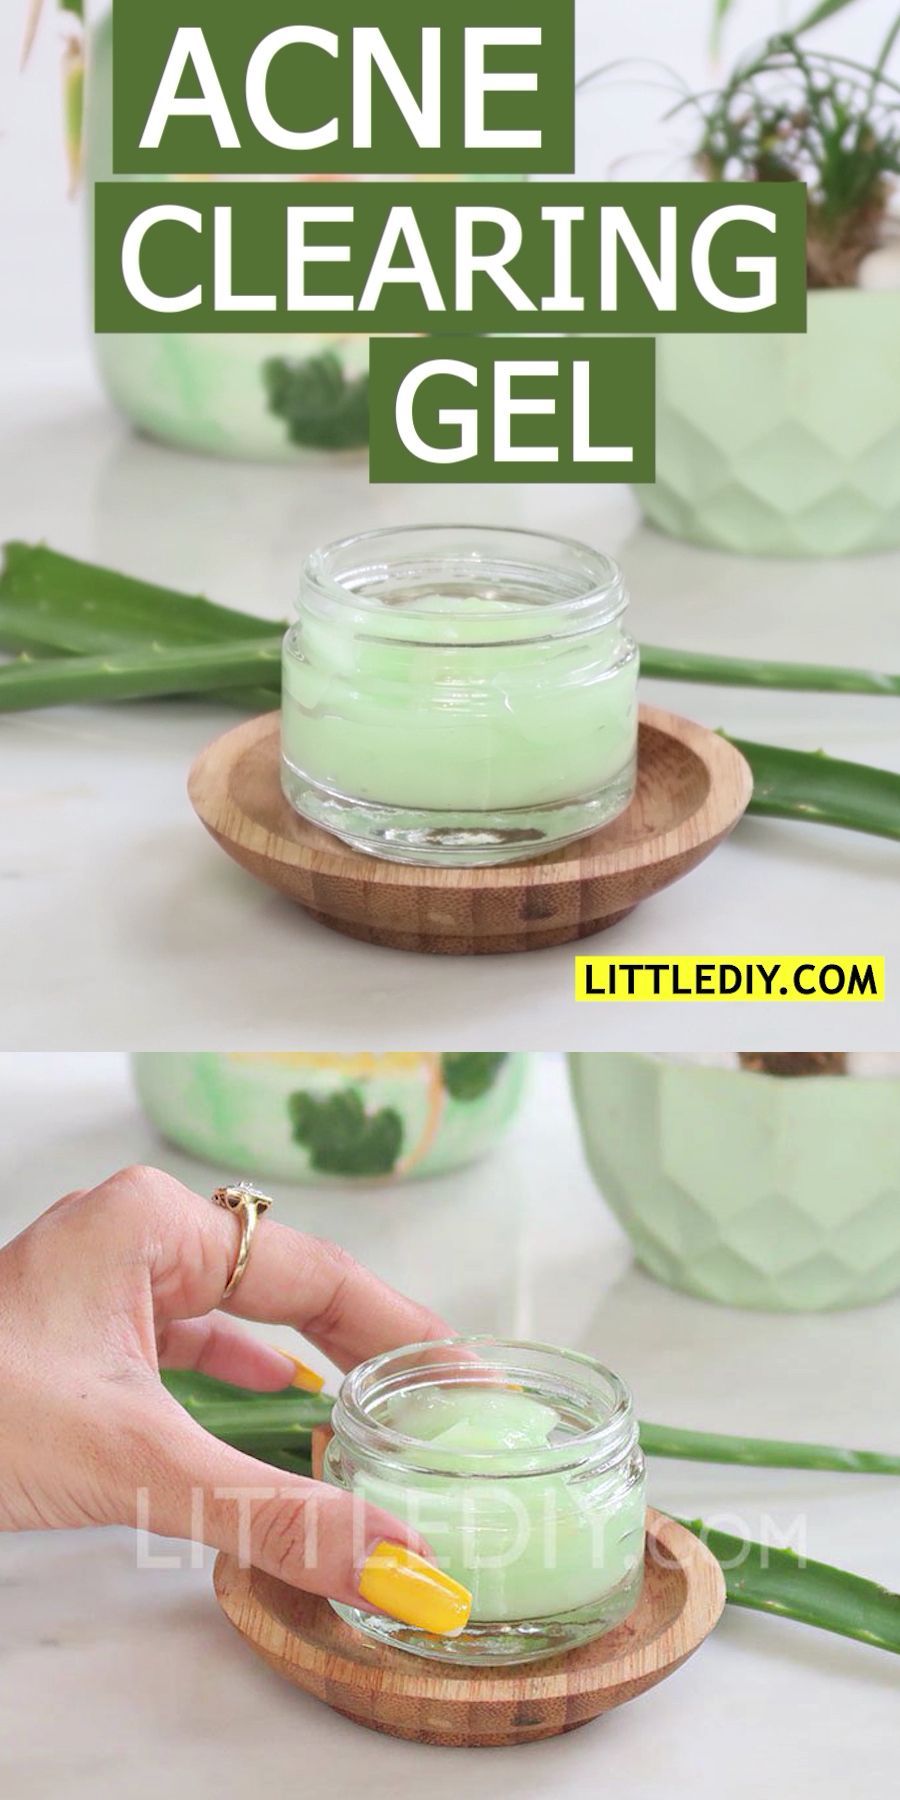 ACNE CLEARING GEL | Little DIY -   20 skin care Tips videos ideas